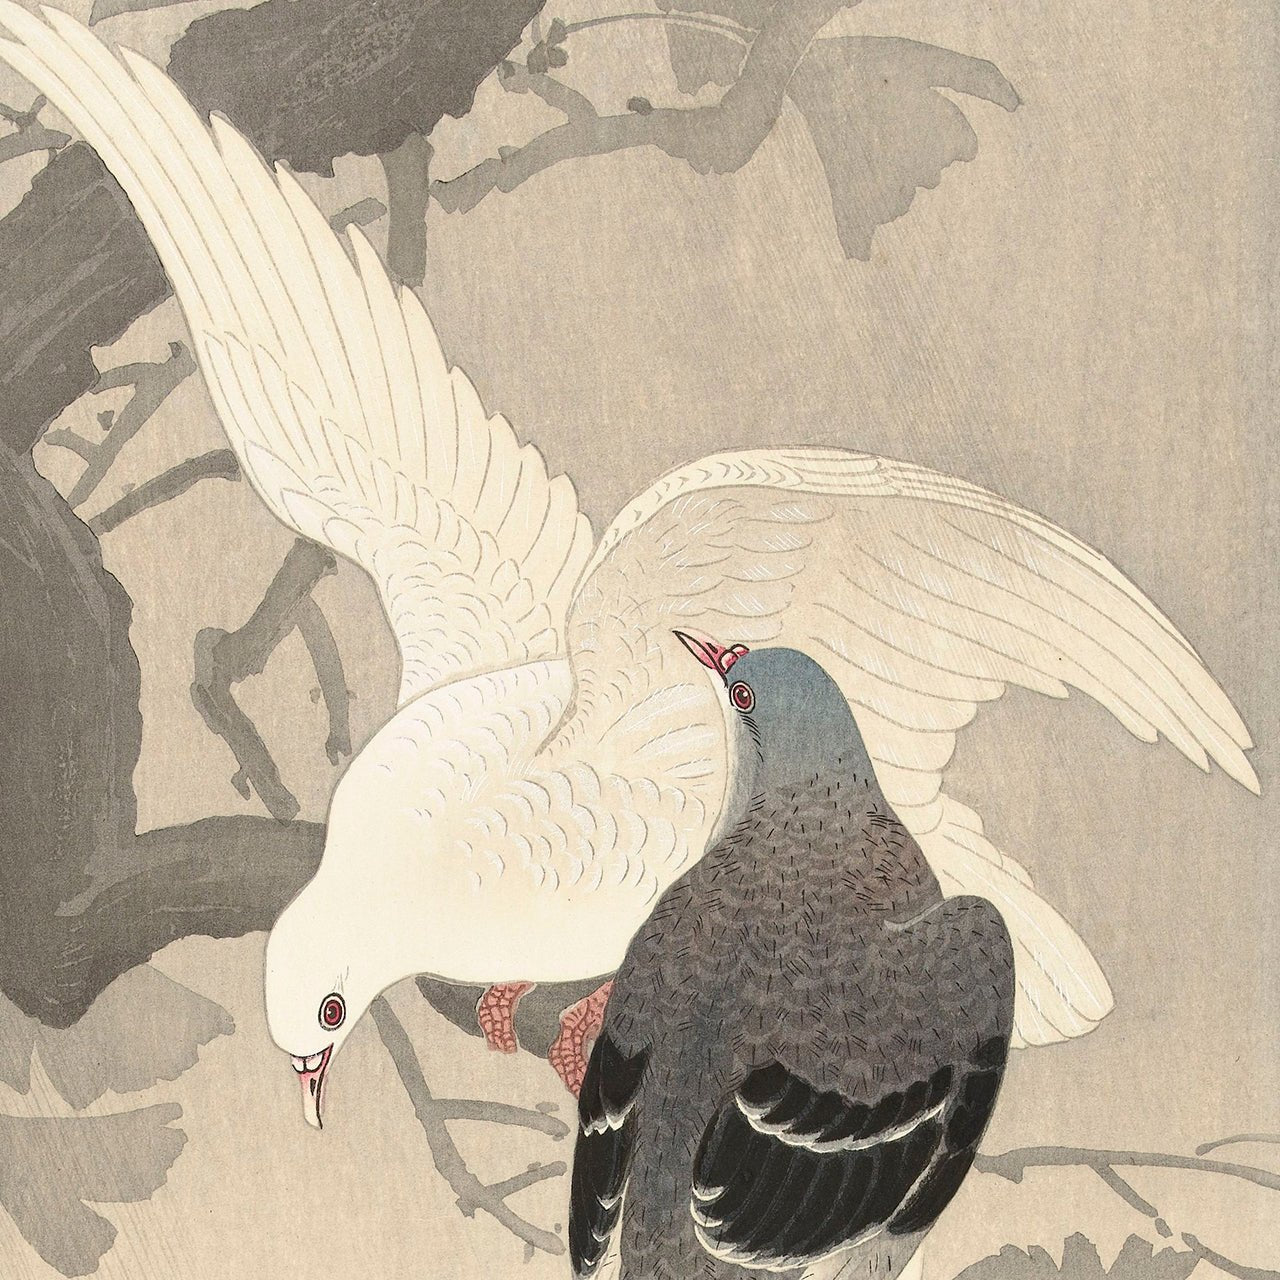 Two doves on a branch - Japonica Graphic